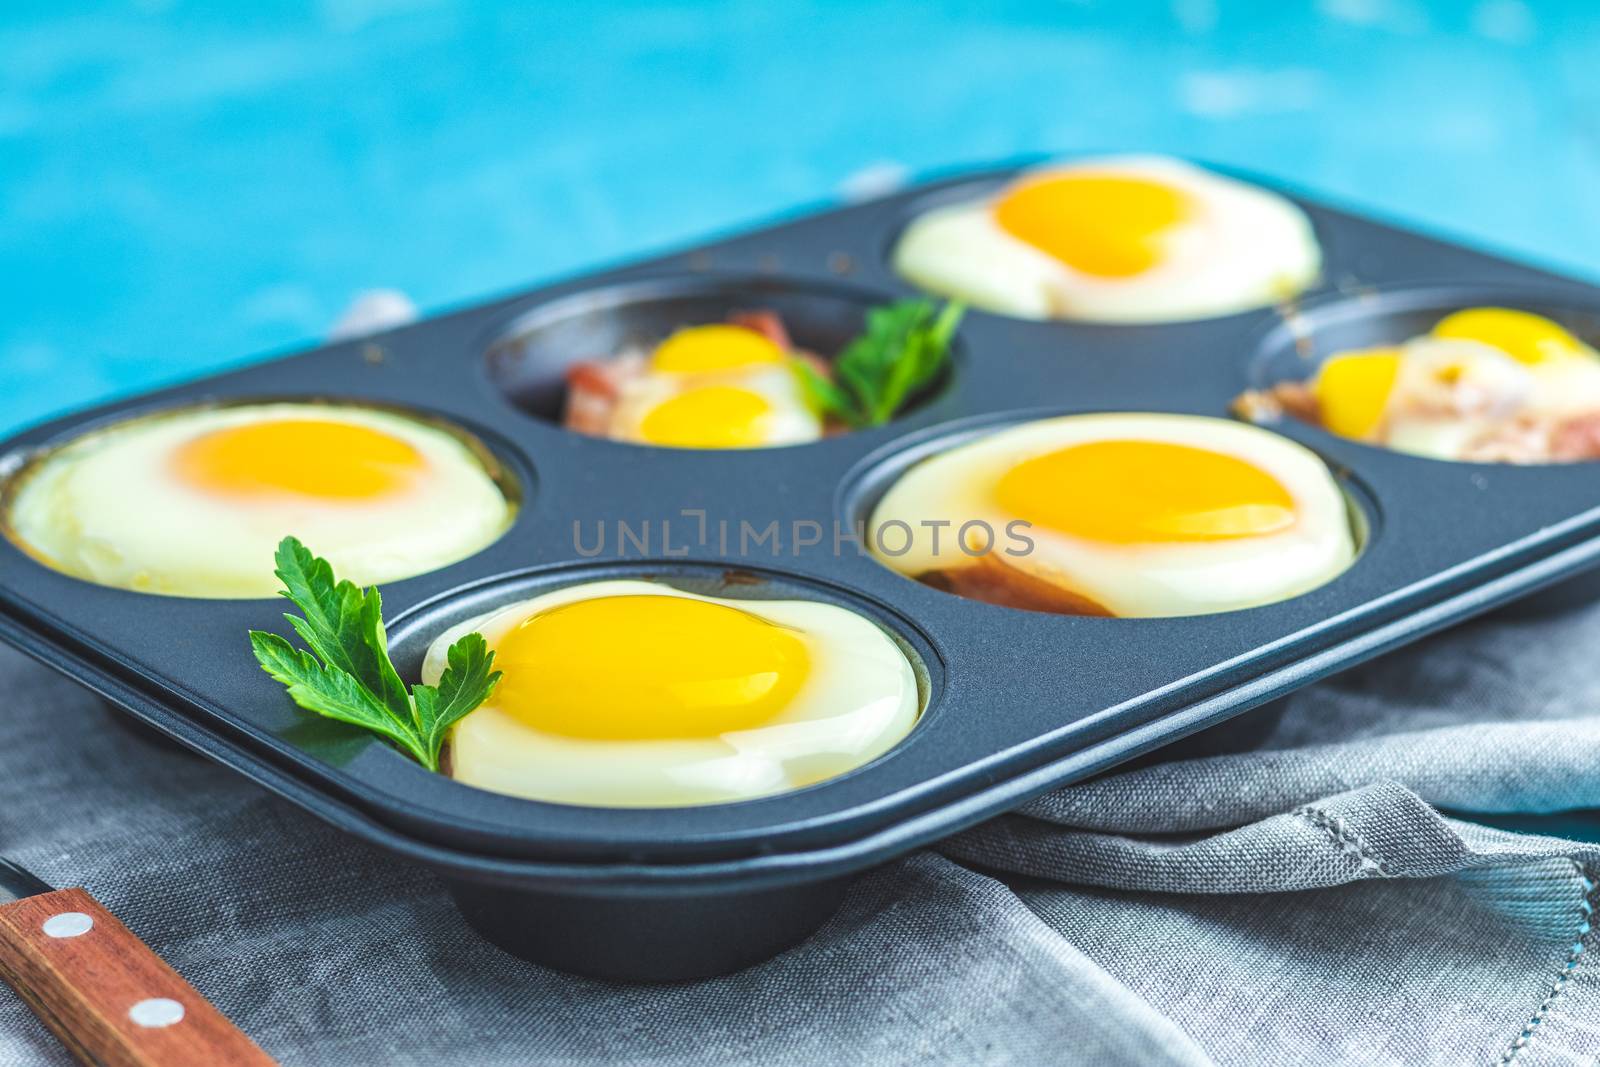 Portioned casserole from bacon sowbelly and eggs in Italian styl by ArtSvitlyna